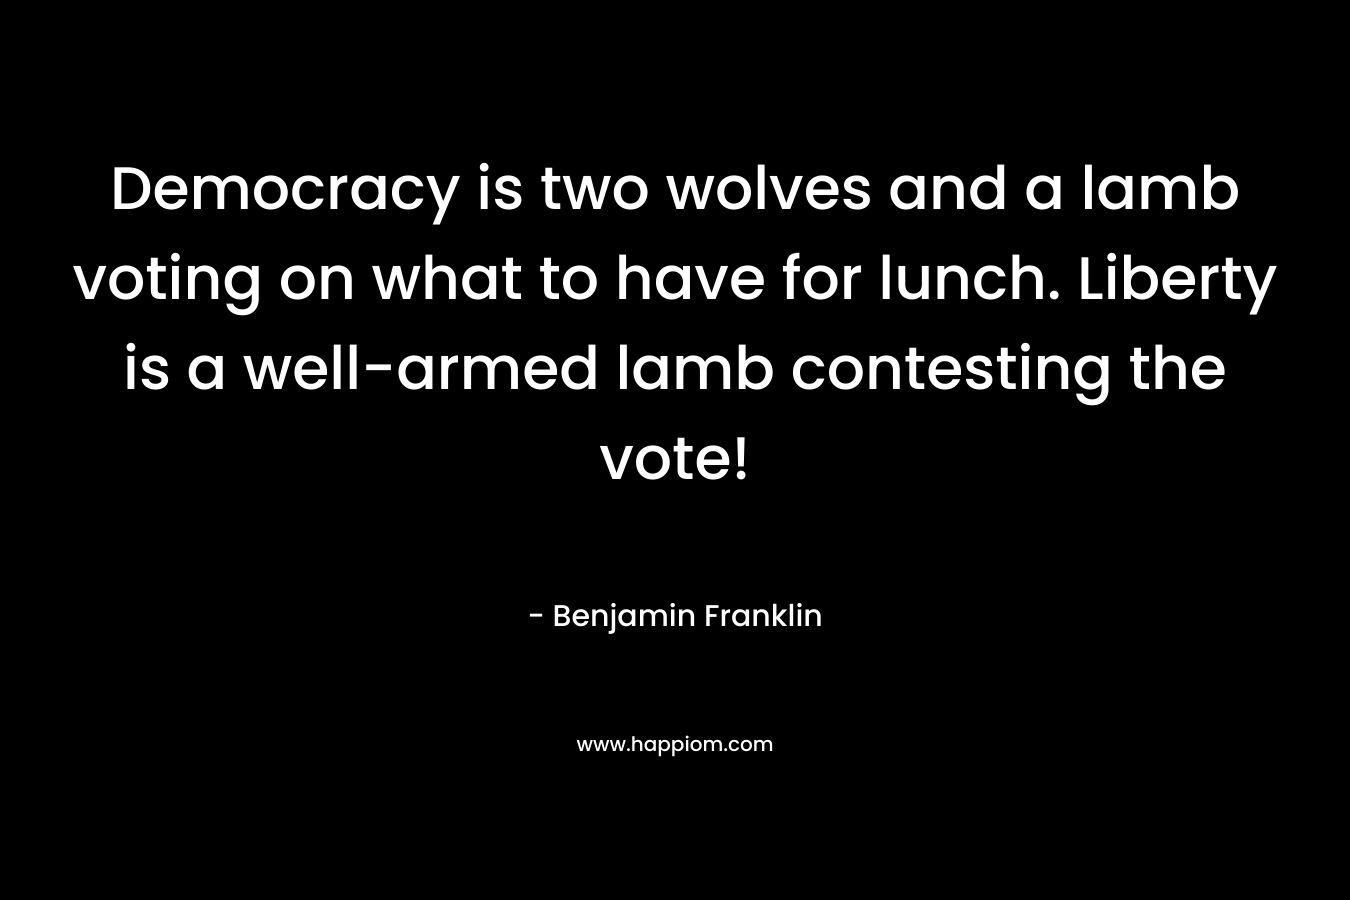 Democracy is two wolves and a lamb voting on what to have for lunch. Liberty is a well-armed lamb contesting the vote! – Benjamin Franklin